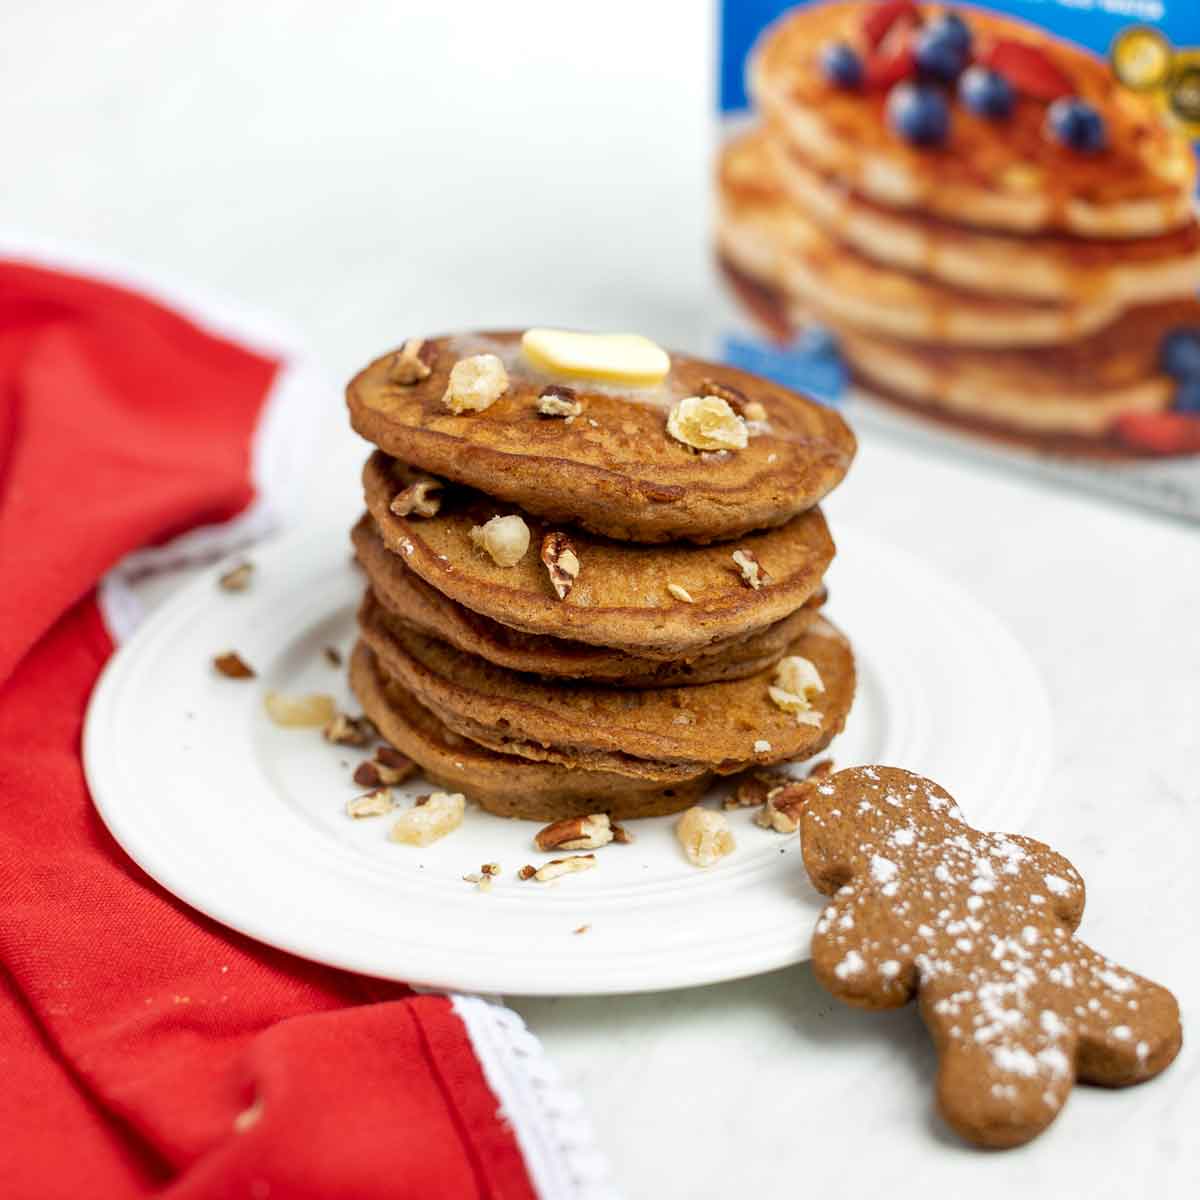 A stack of Gingerbread Pancakes topped with butter and chopped pecans.